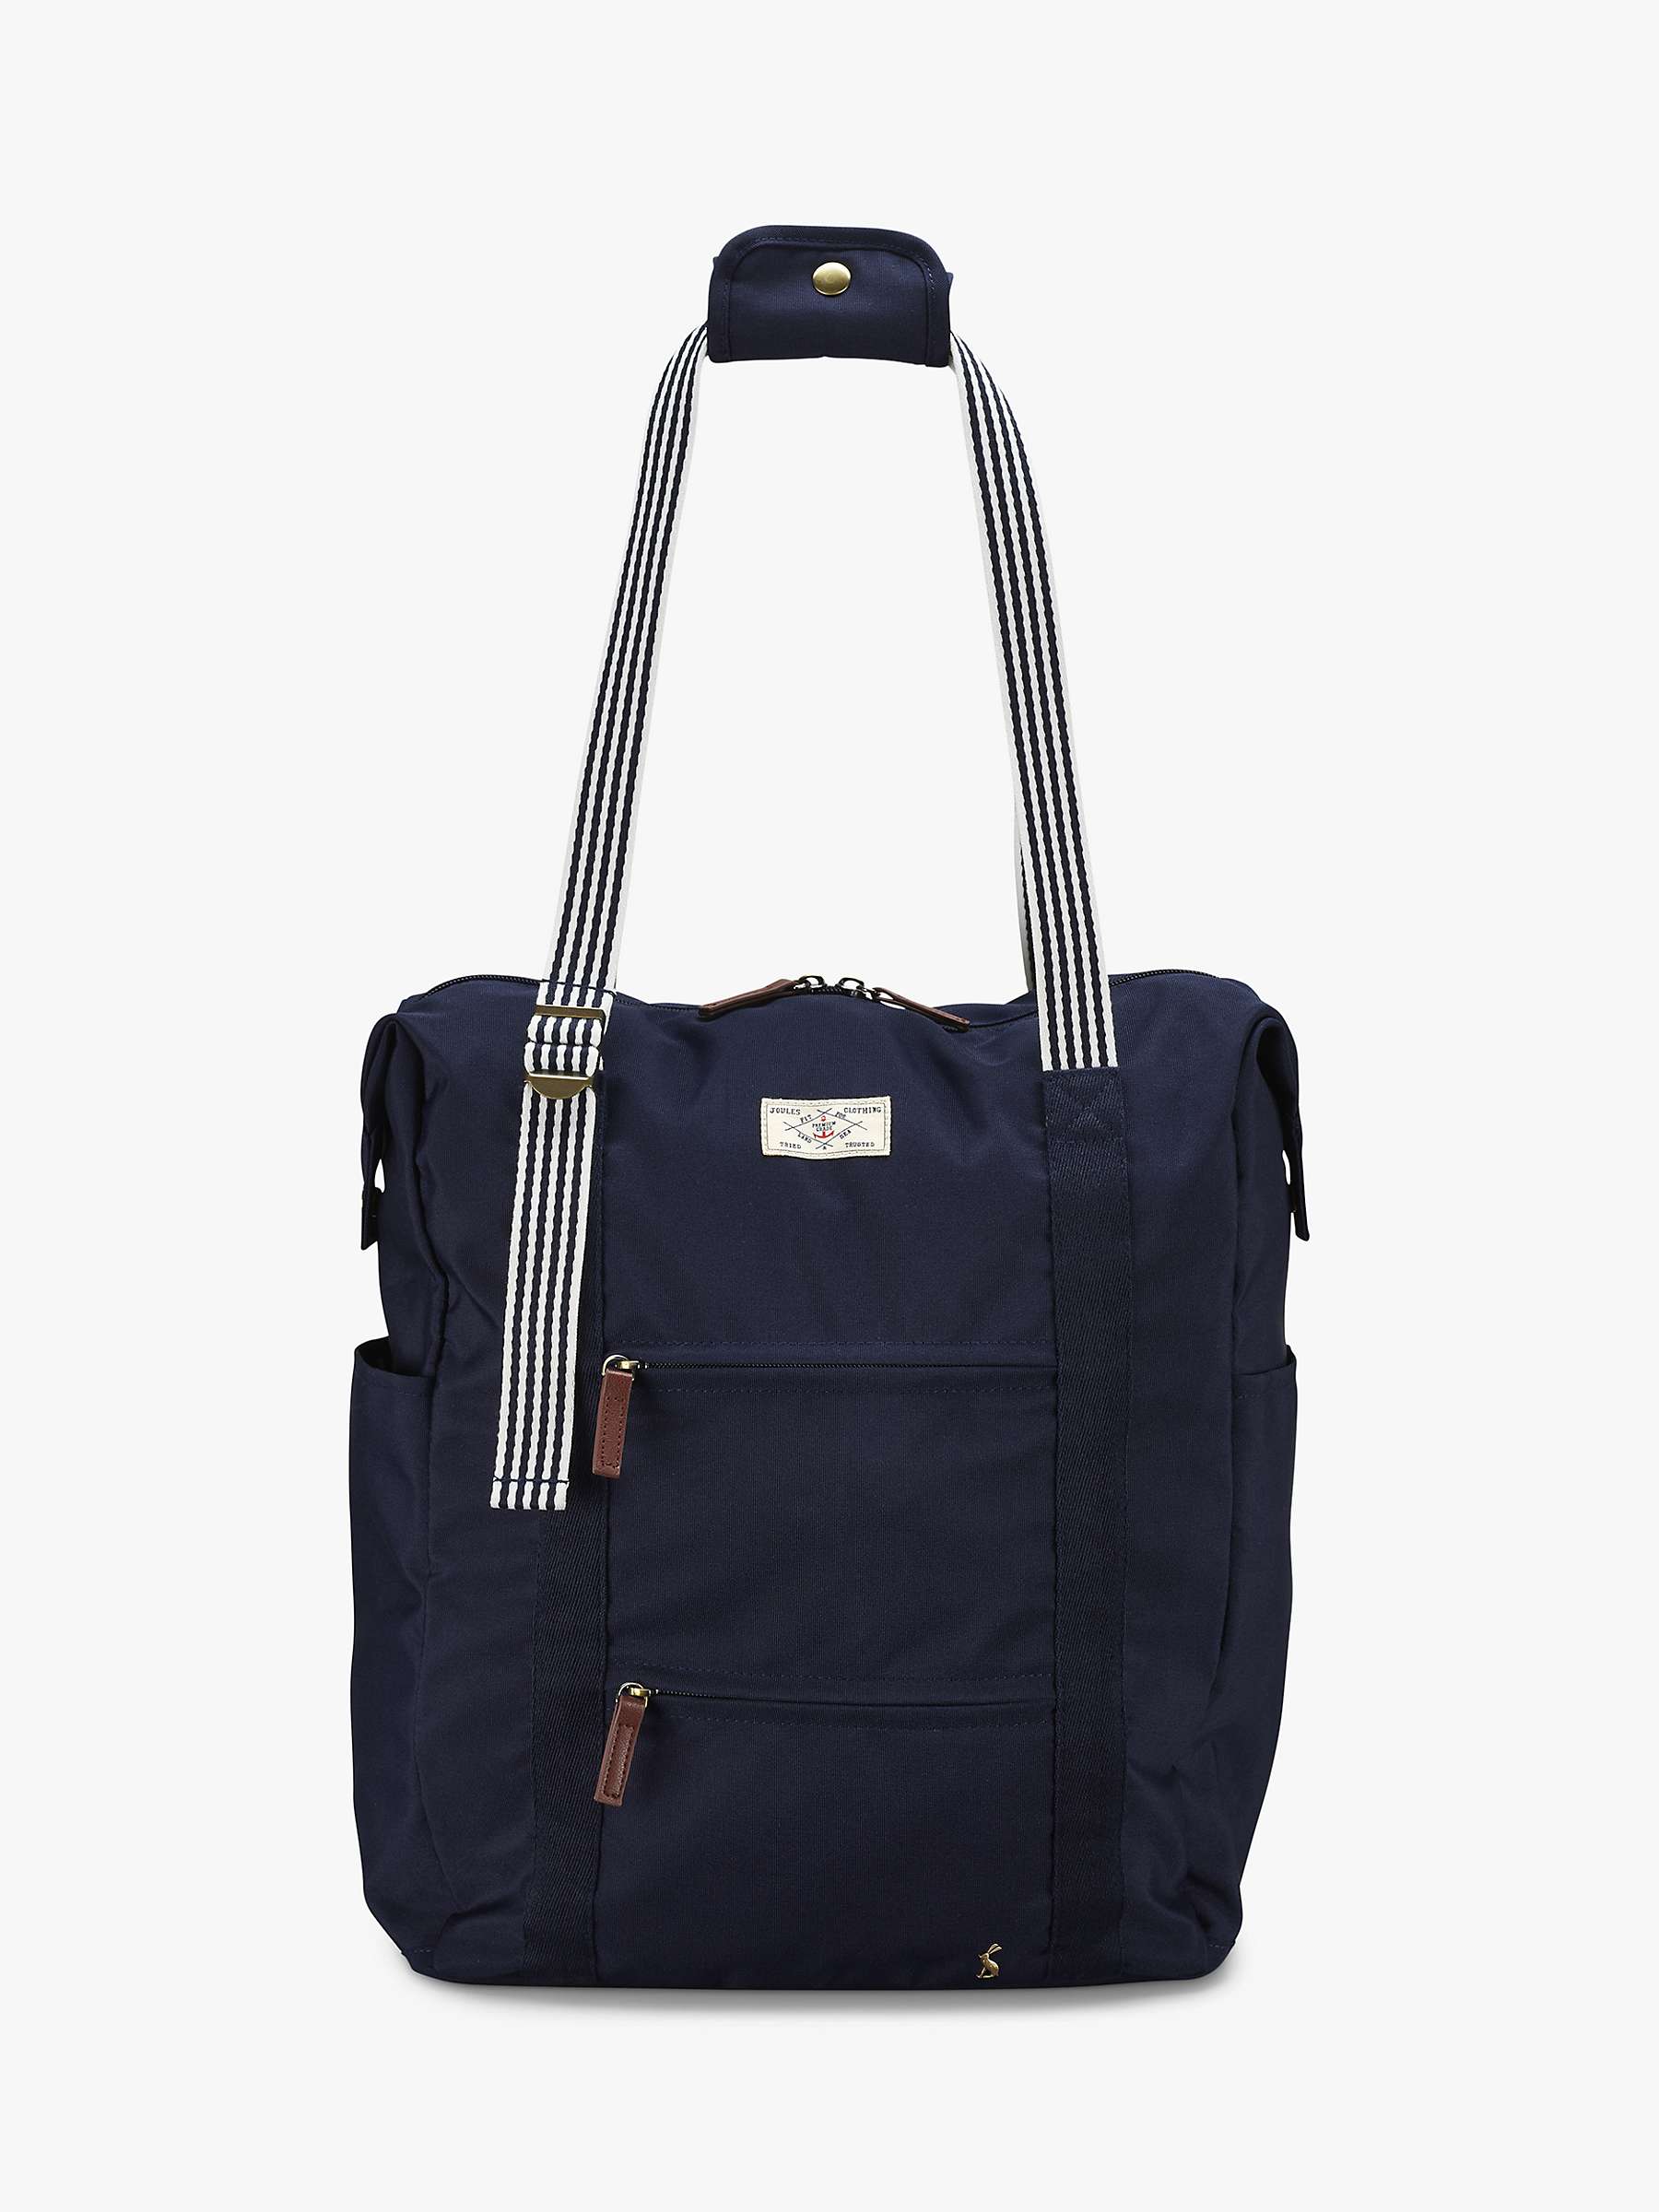 Buy Joules Coast Collection Travel Backpack Online at johnlewis.com